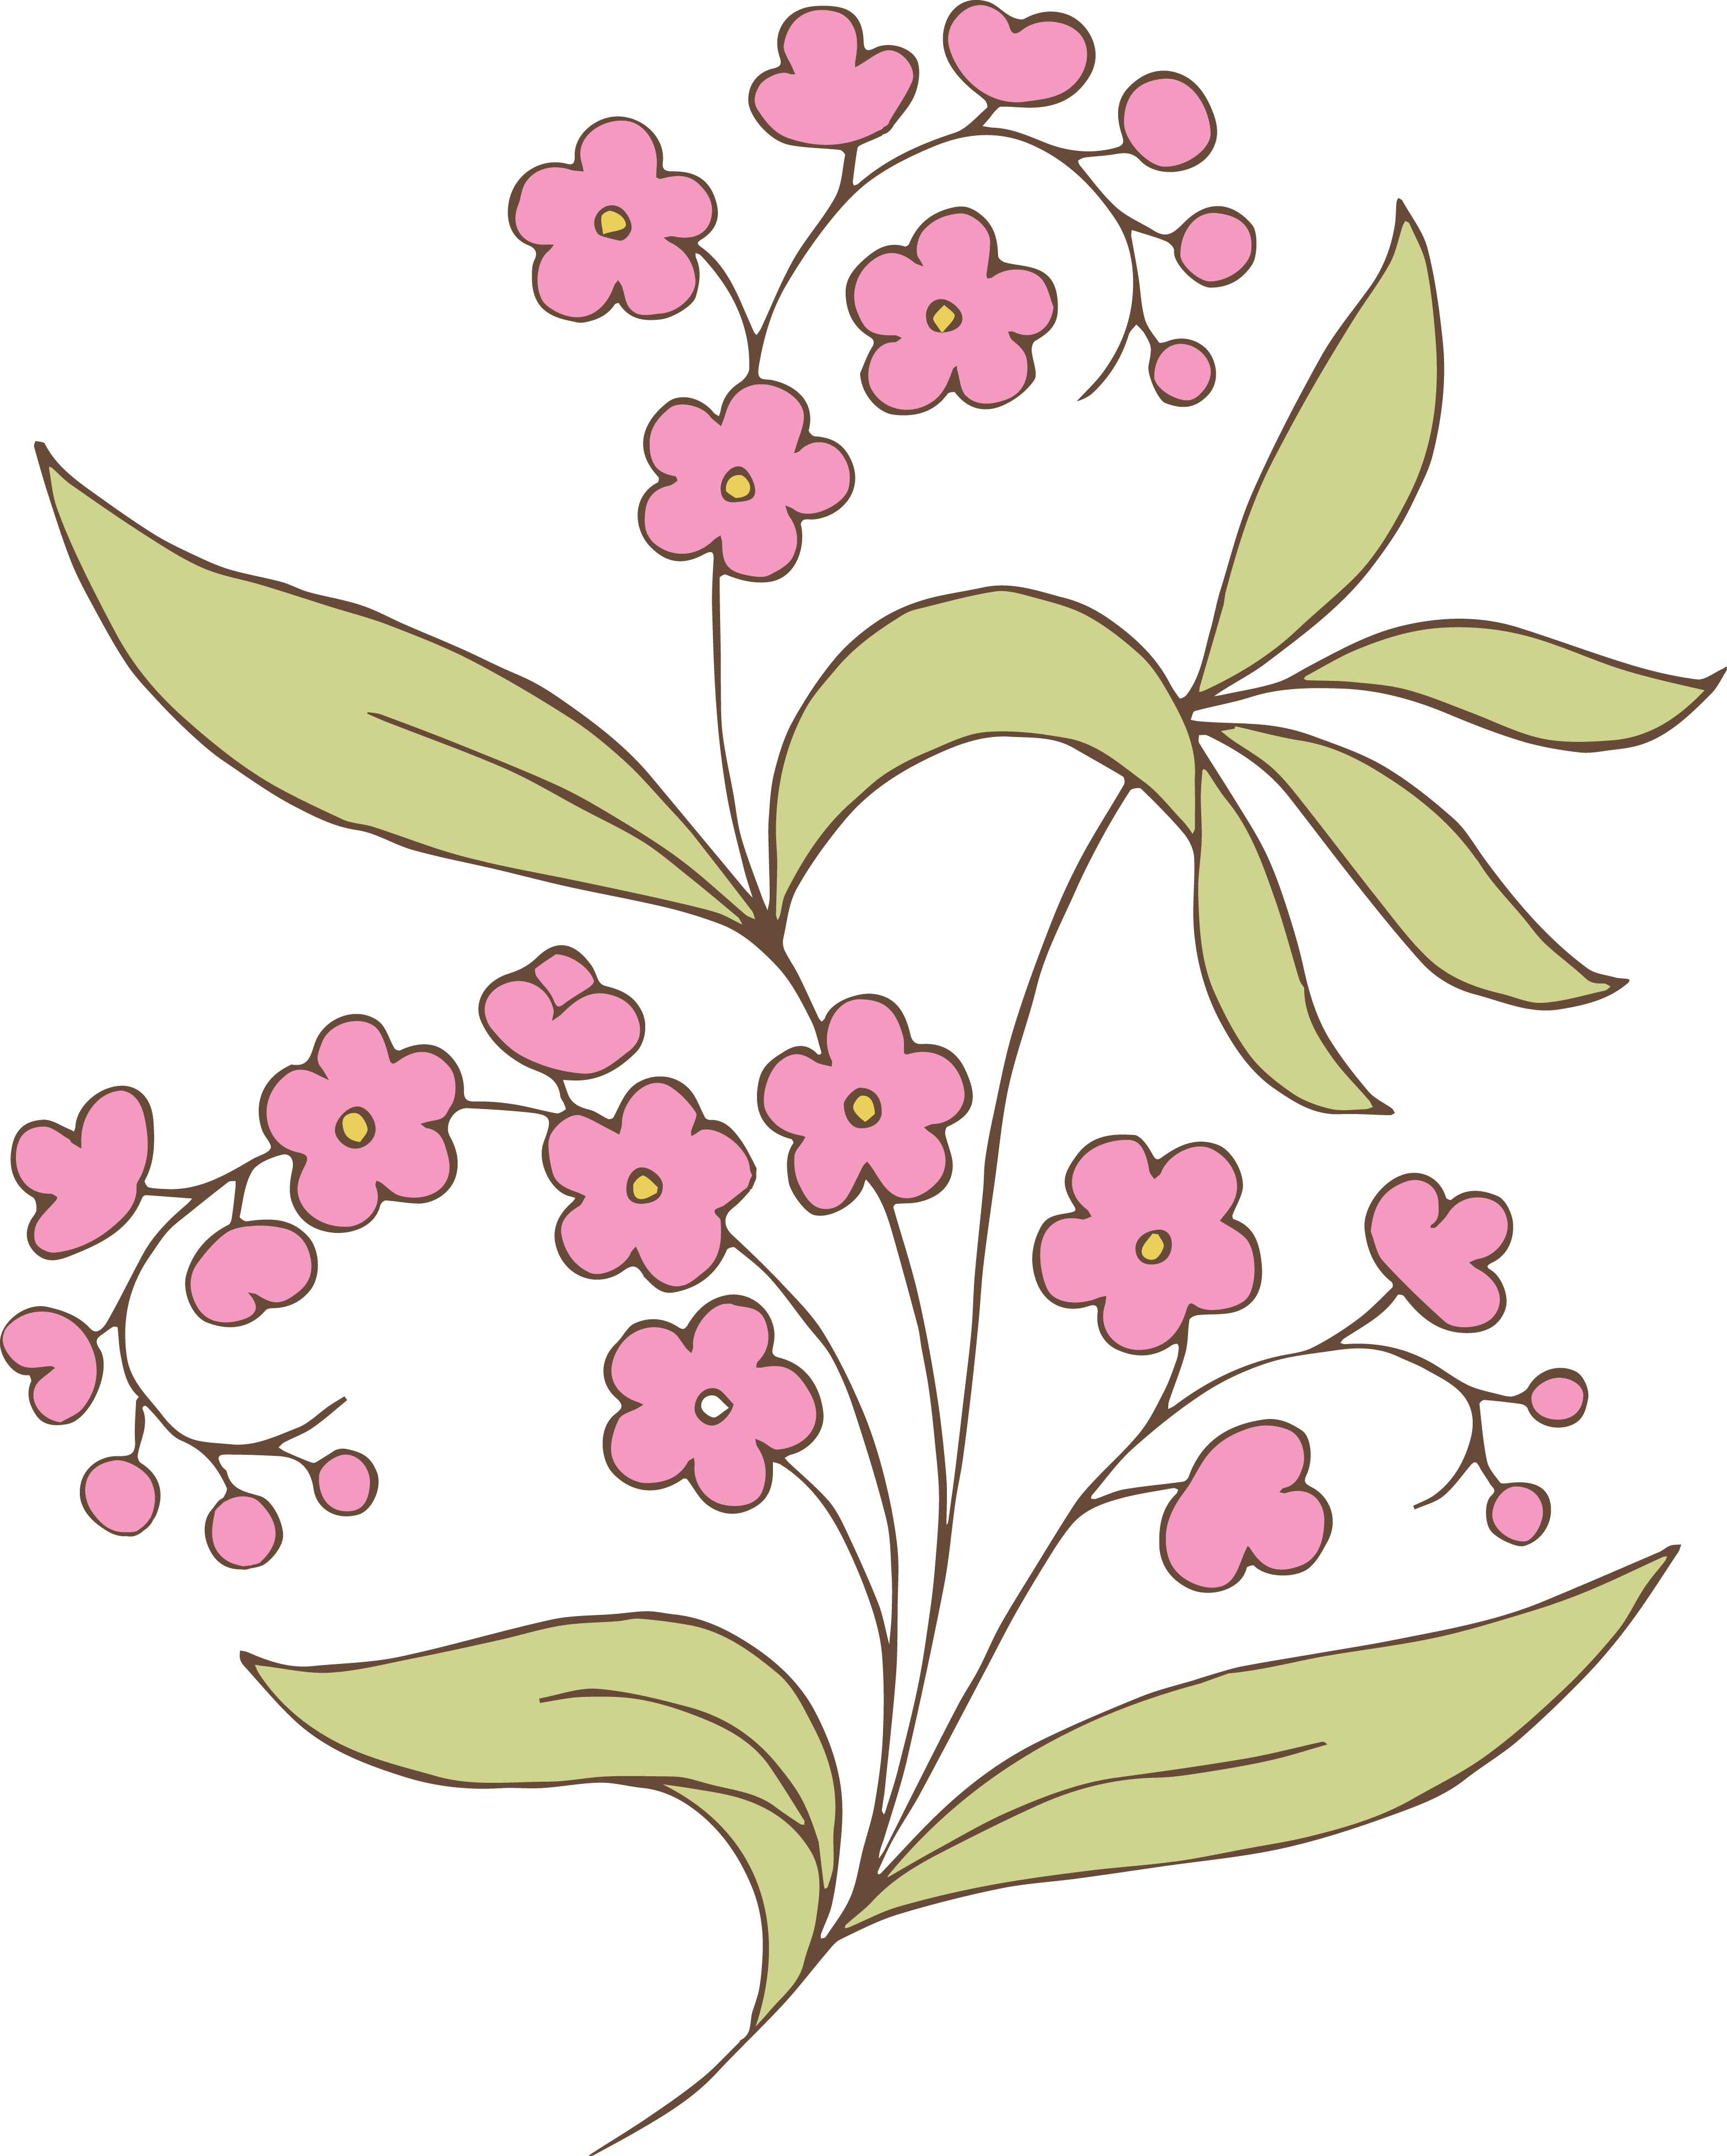 Free Stock Vector – Vintage Pink Flower & Clip Art Images | Oh So ...